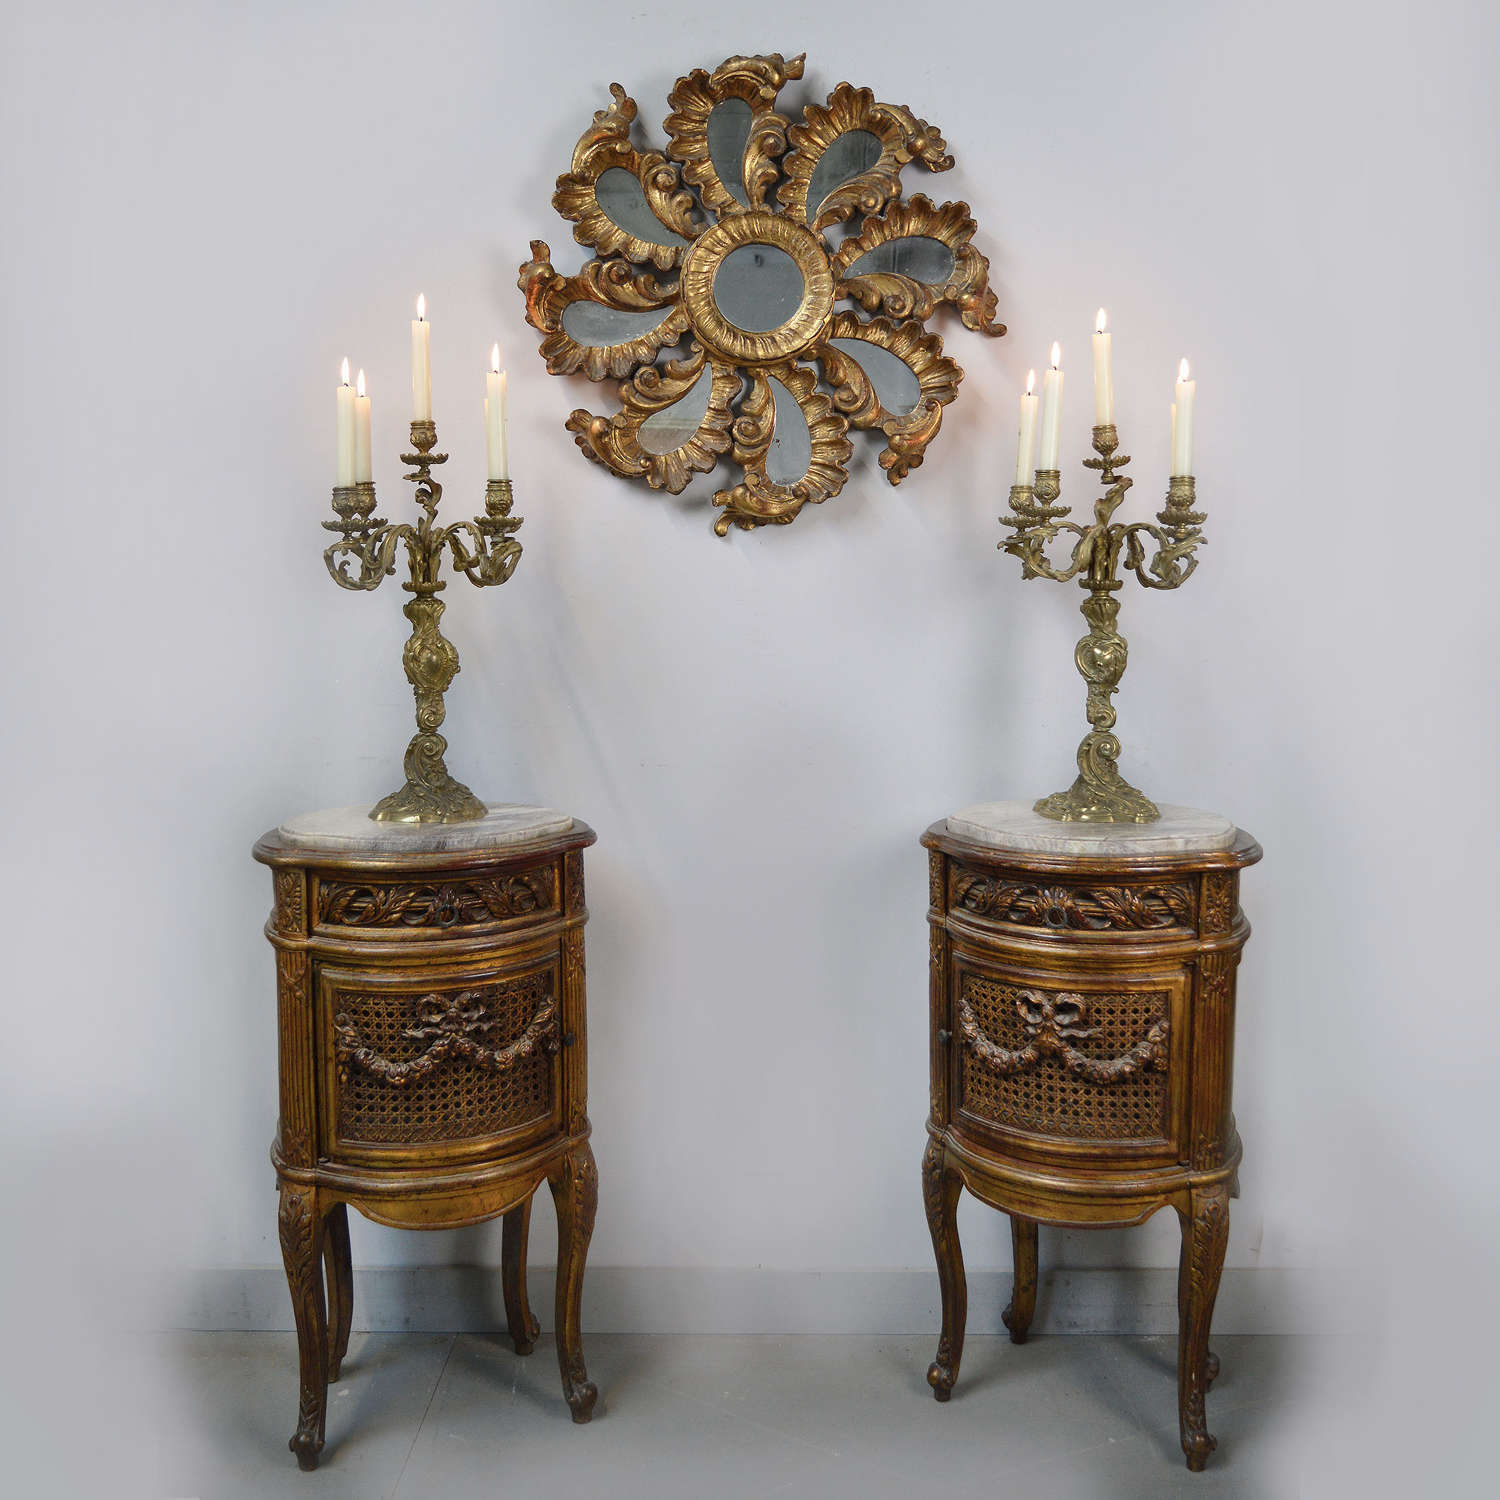 Pair of Louis XVI style giltwood bedside cabinets